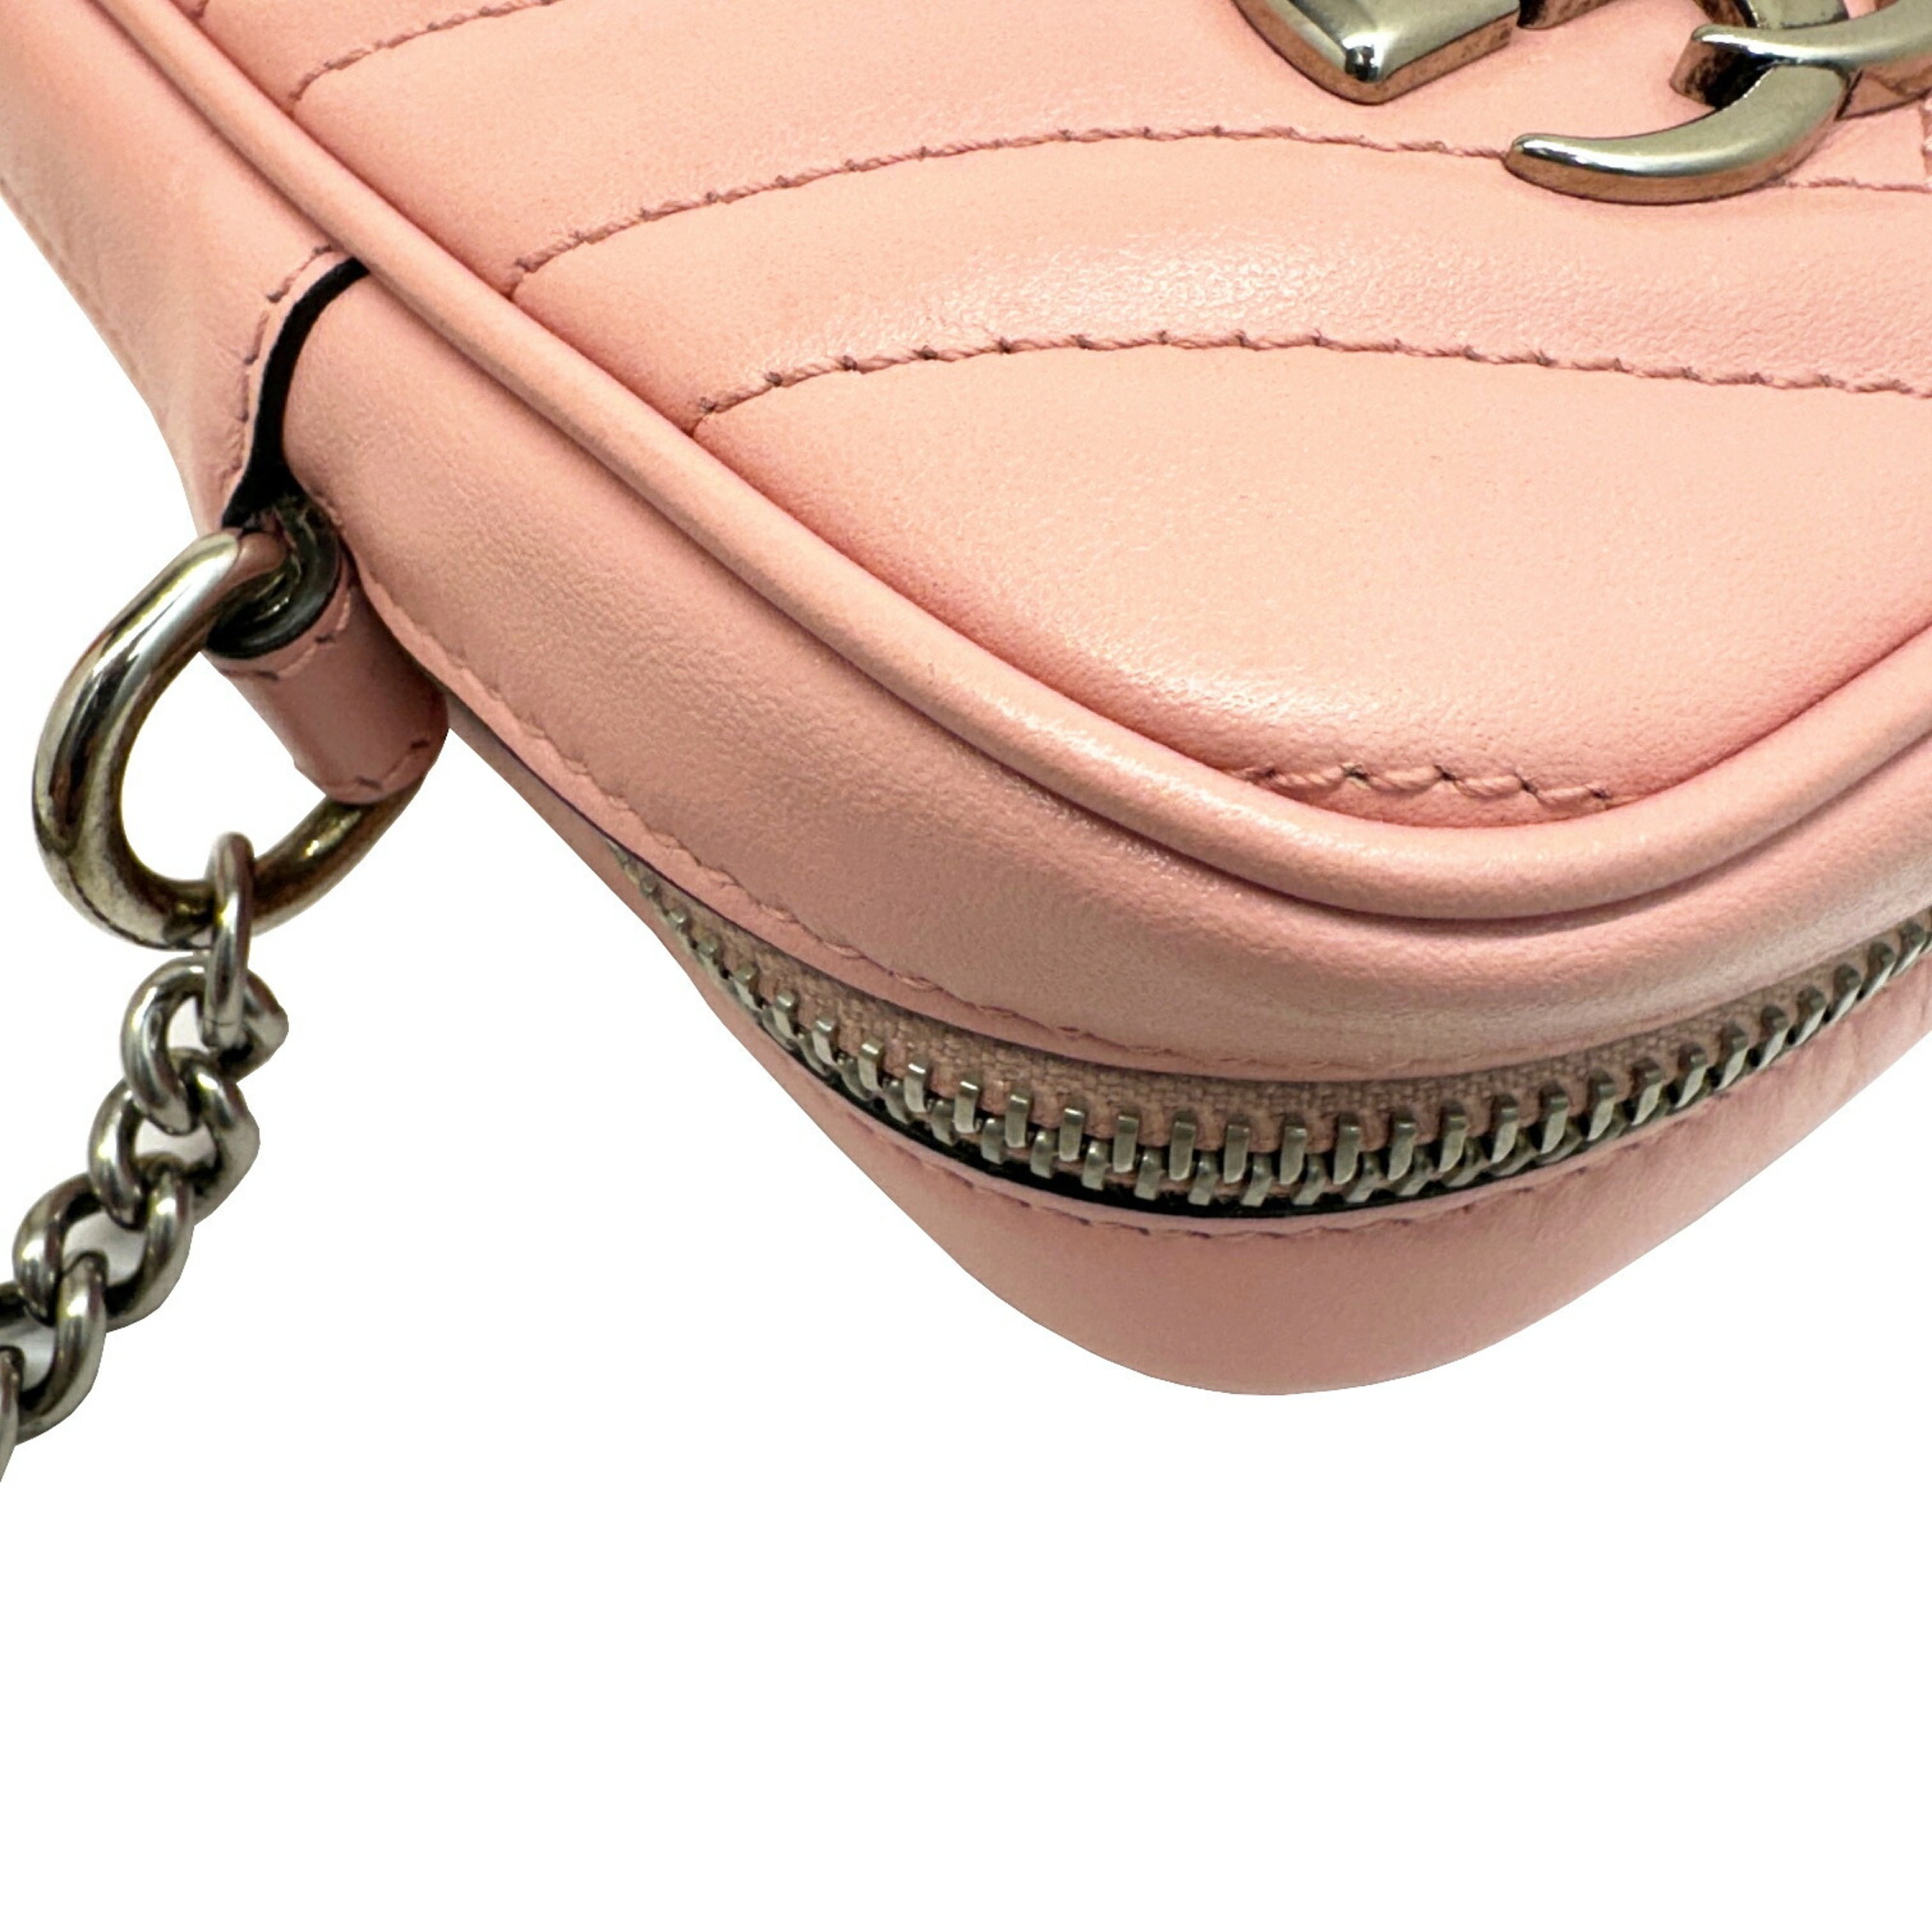 GUCCI GG Marmont Shoulder Bag Chain 598597 Heart Pink Calf Ladies